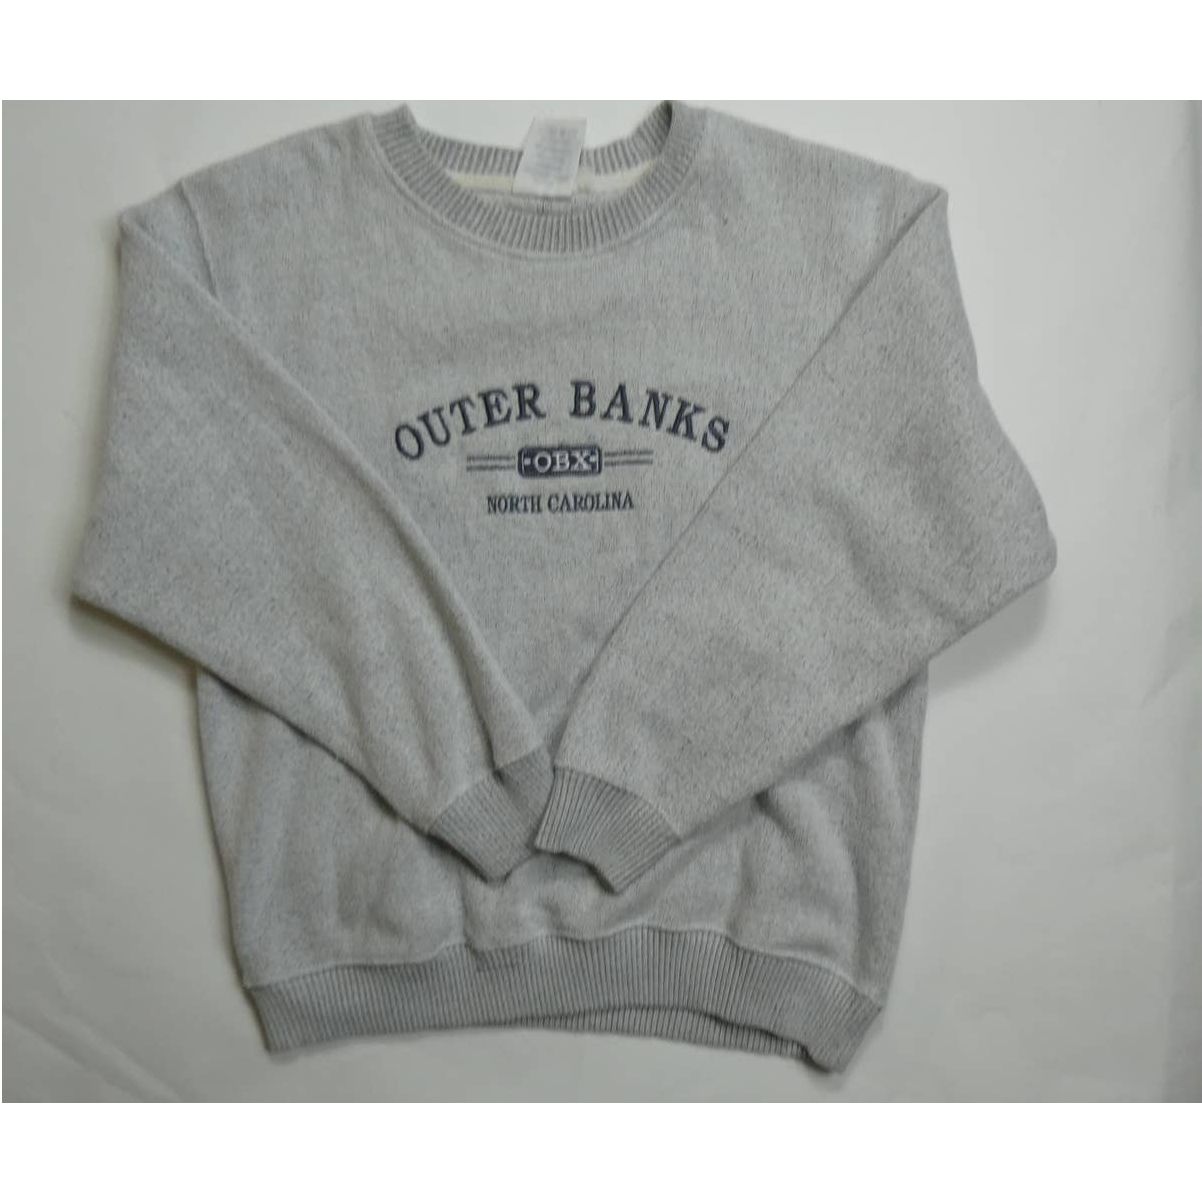 Catch Surf Esy Surf Co soft sweatshirt, small, Outer Banks NC, NEW ...